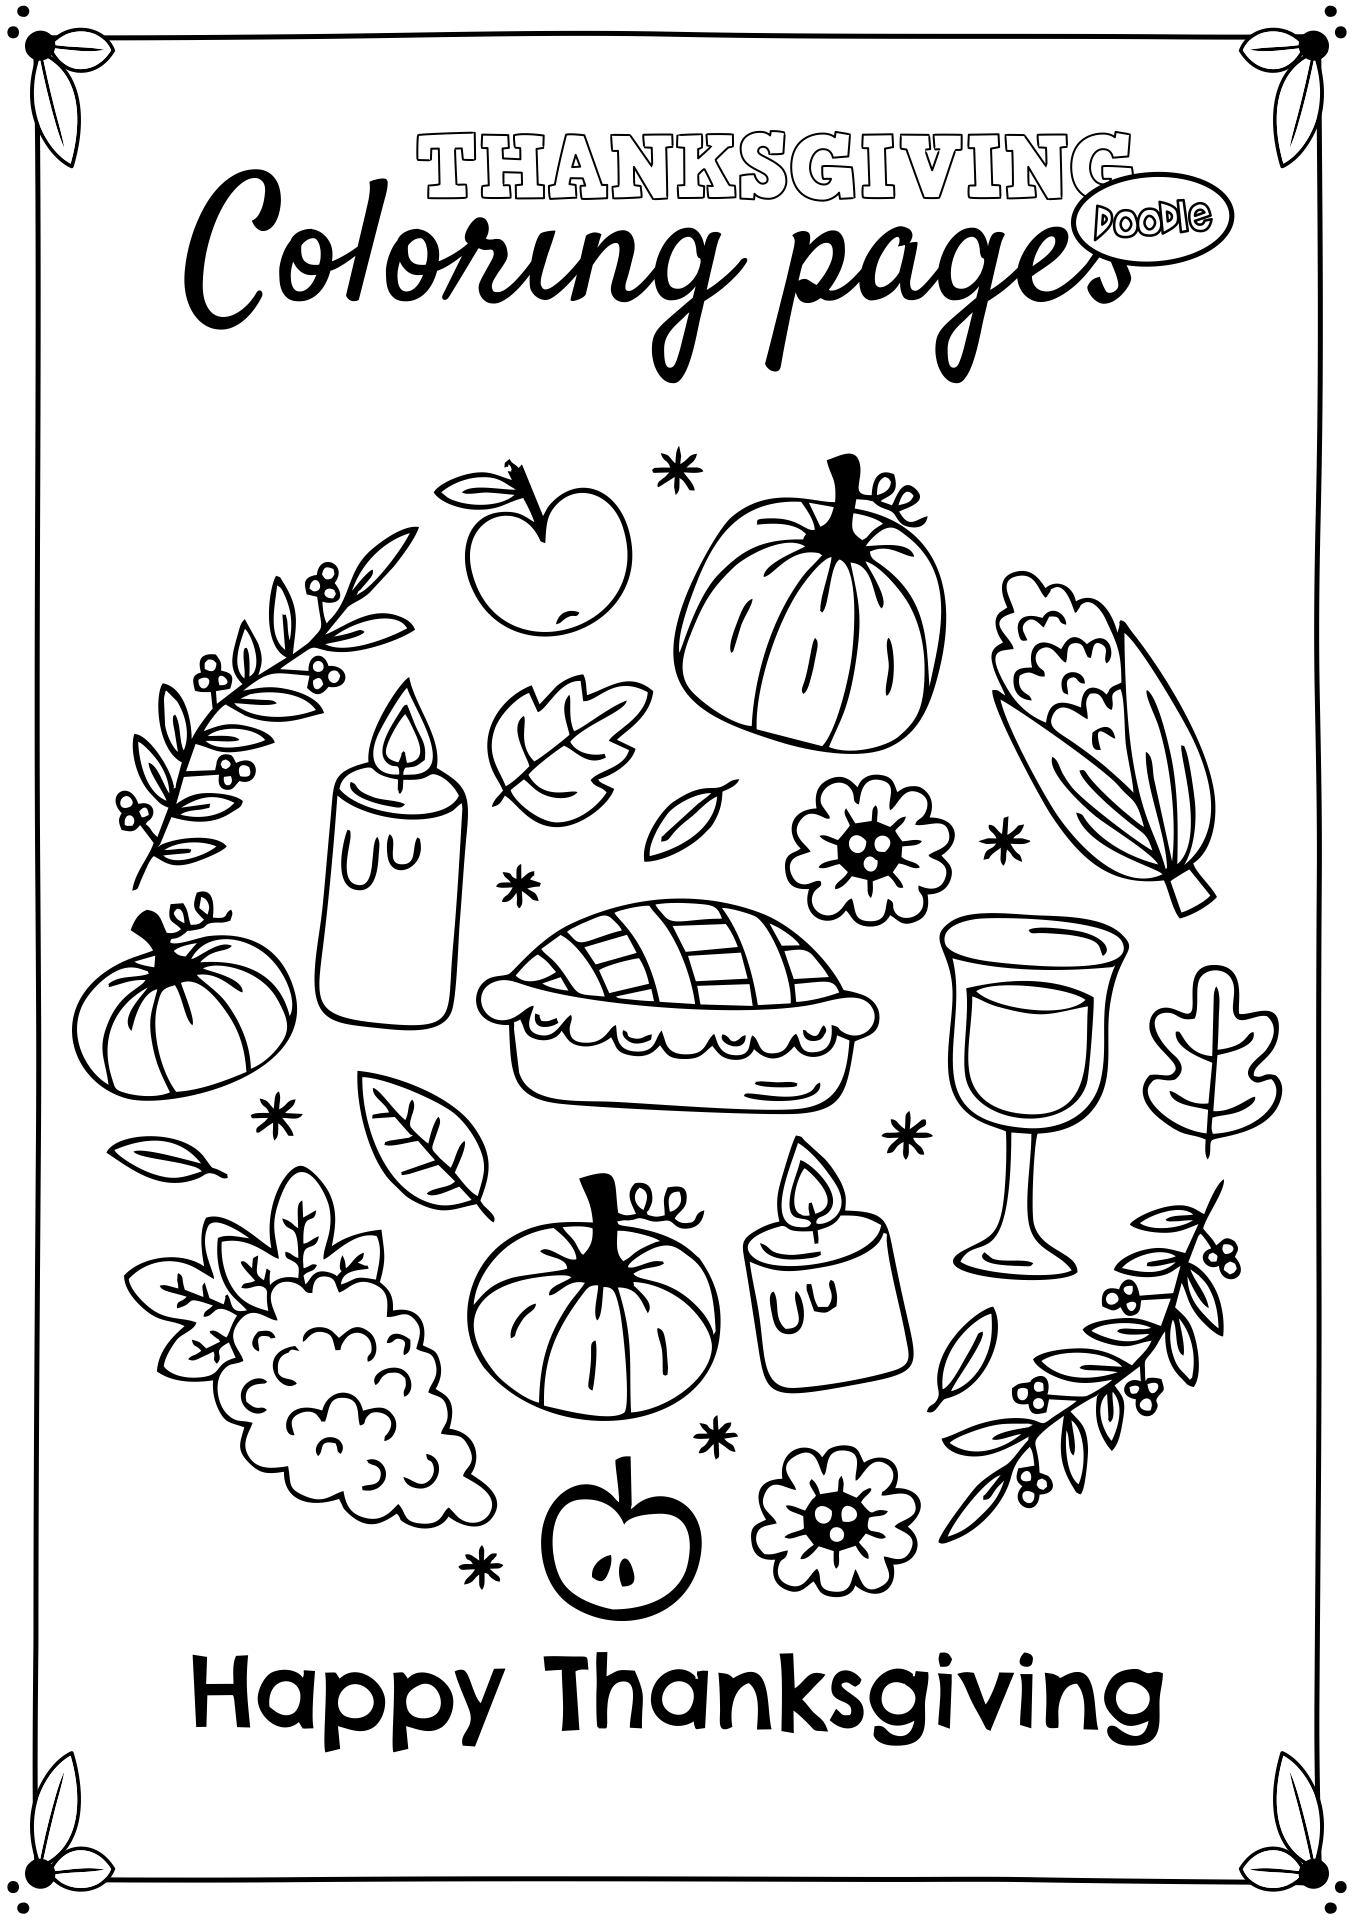 Thanksgiving Coloring Page Doodle